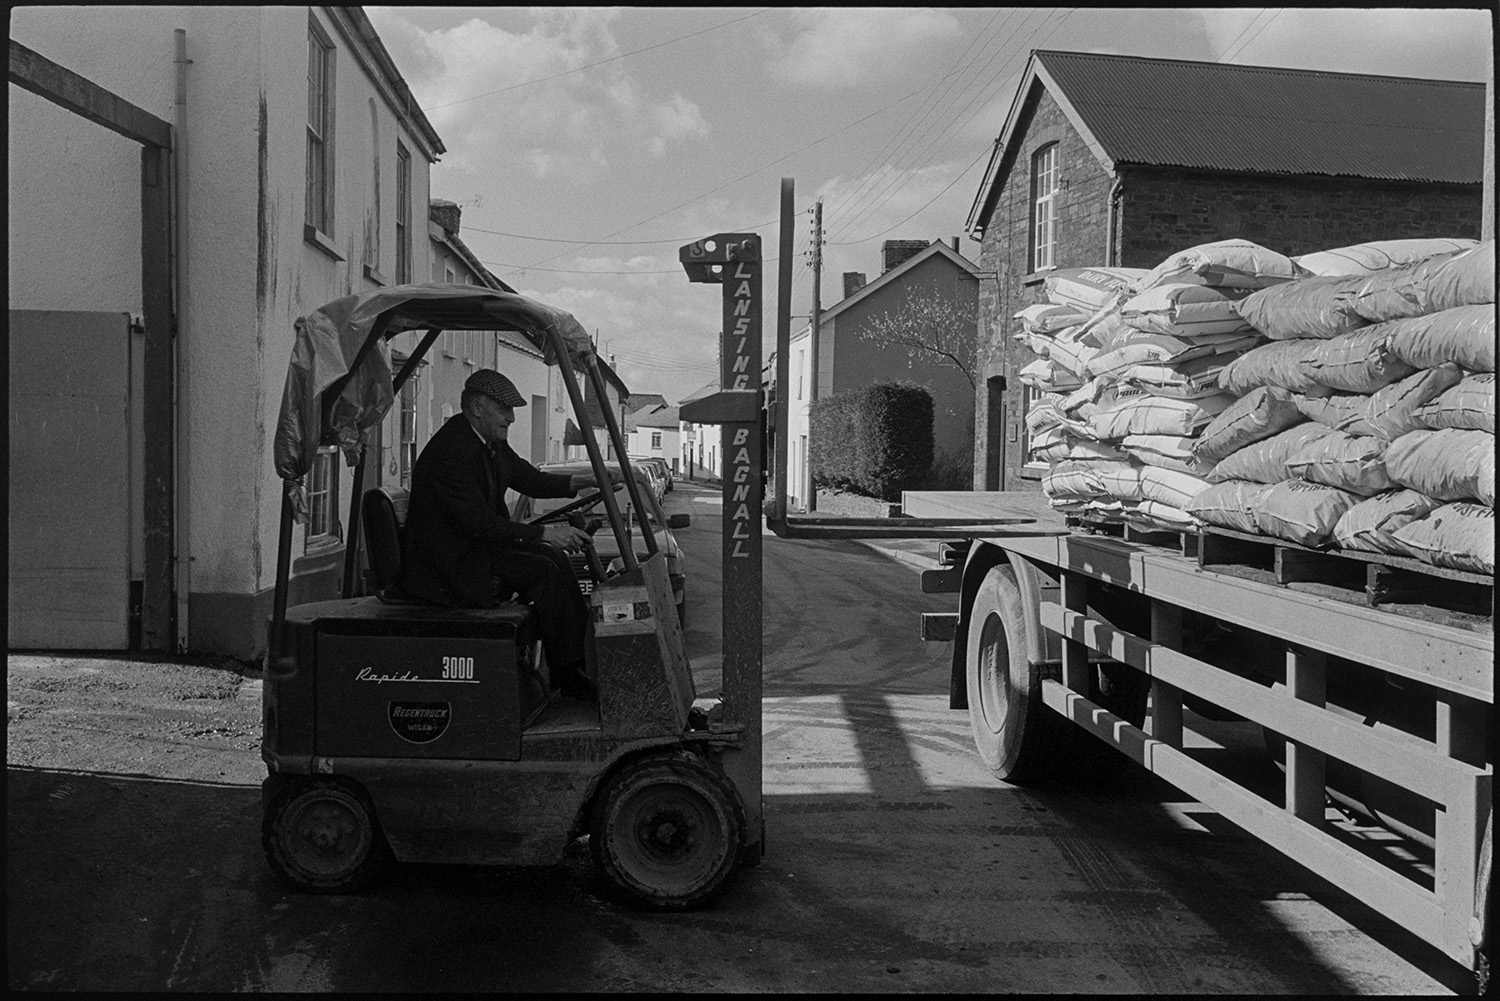 Men unloading fertiliser with fork lift truck.
[Les Shapland using a fork lift truck to unload bags of fertiliser from a lorry parked on East Street, Chulmleigh. There are parked cars and town houses in the background.]